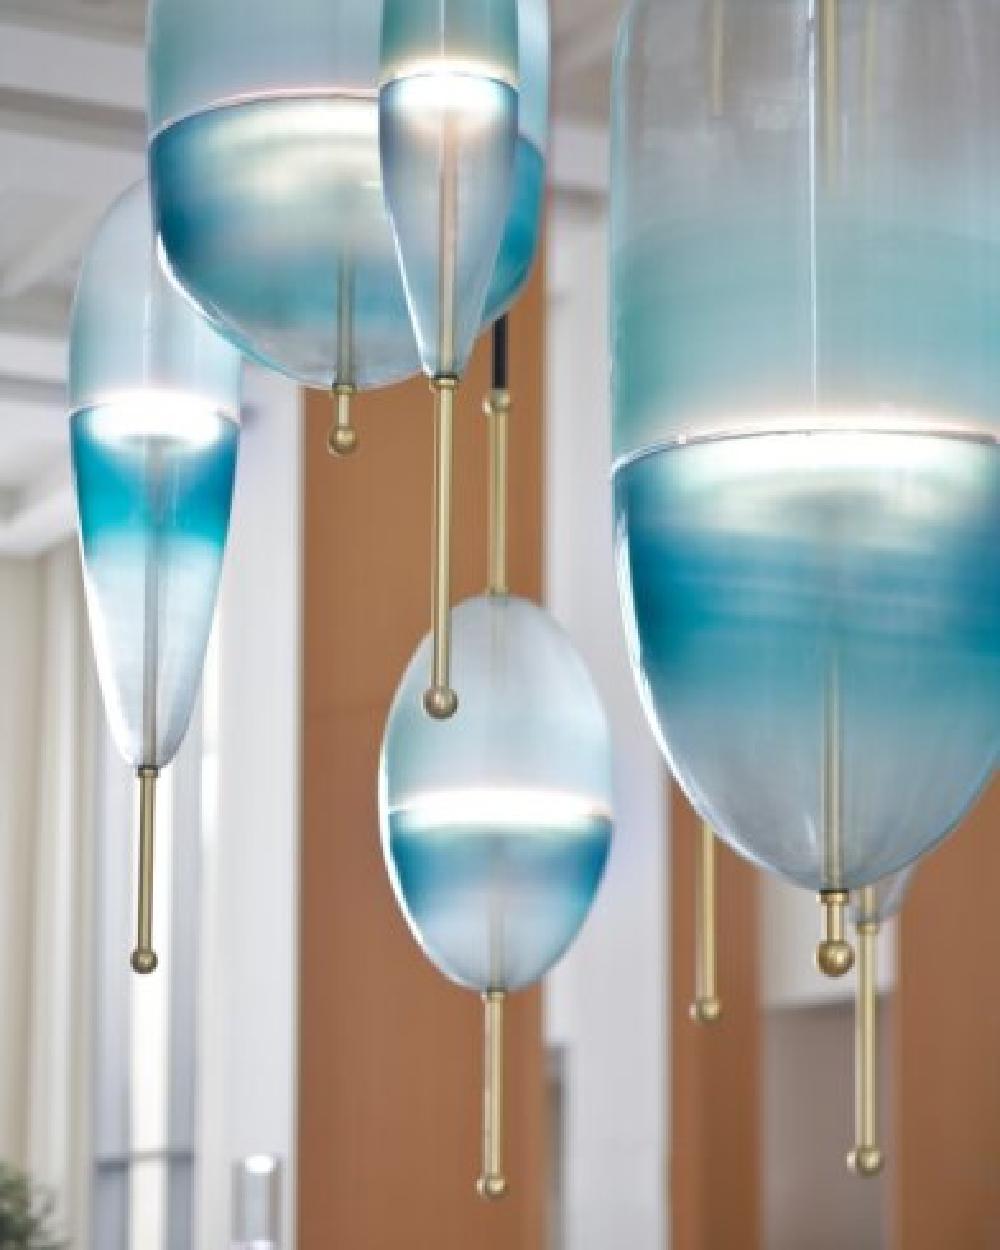 FLOW[T] S3 Pendant lamp in Turquoise by Nao Tamura for Wonderglass For Sale 2